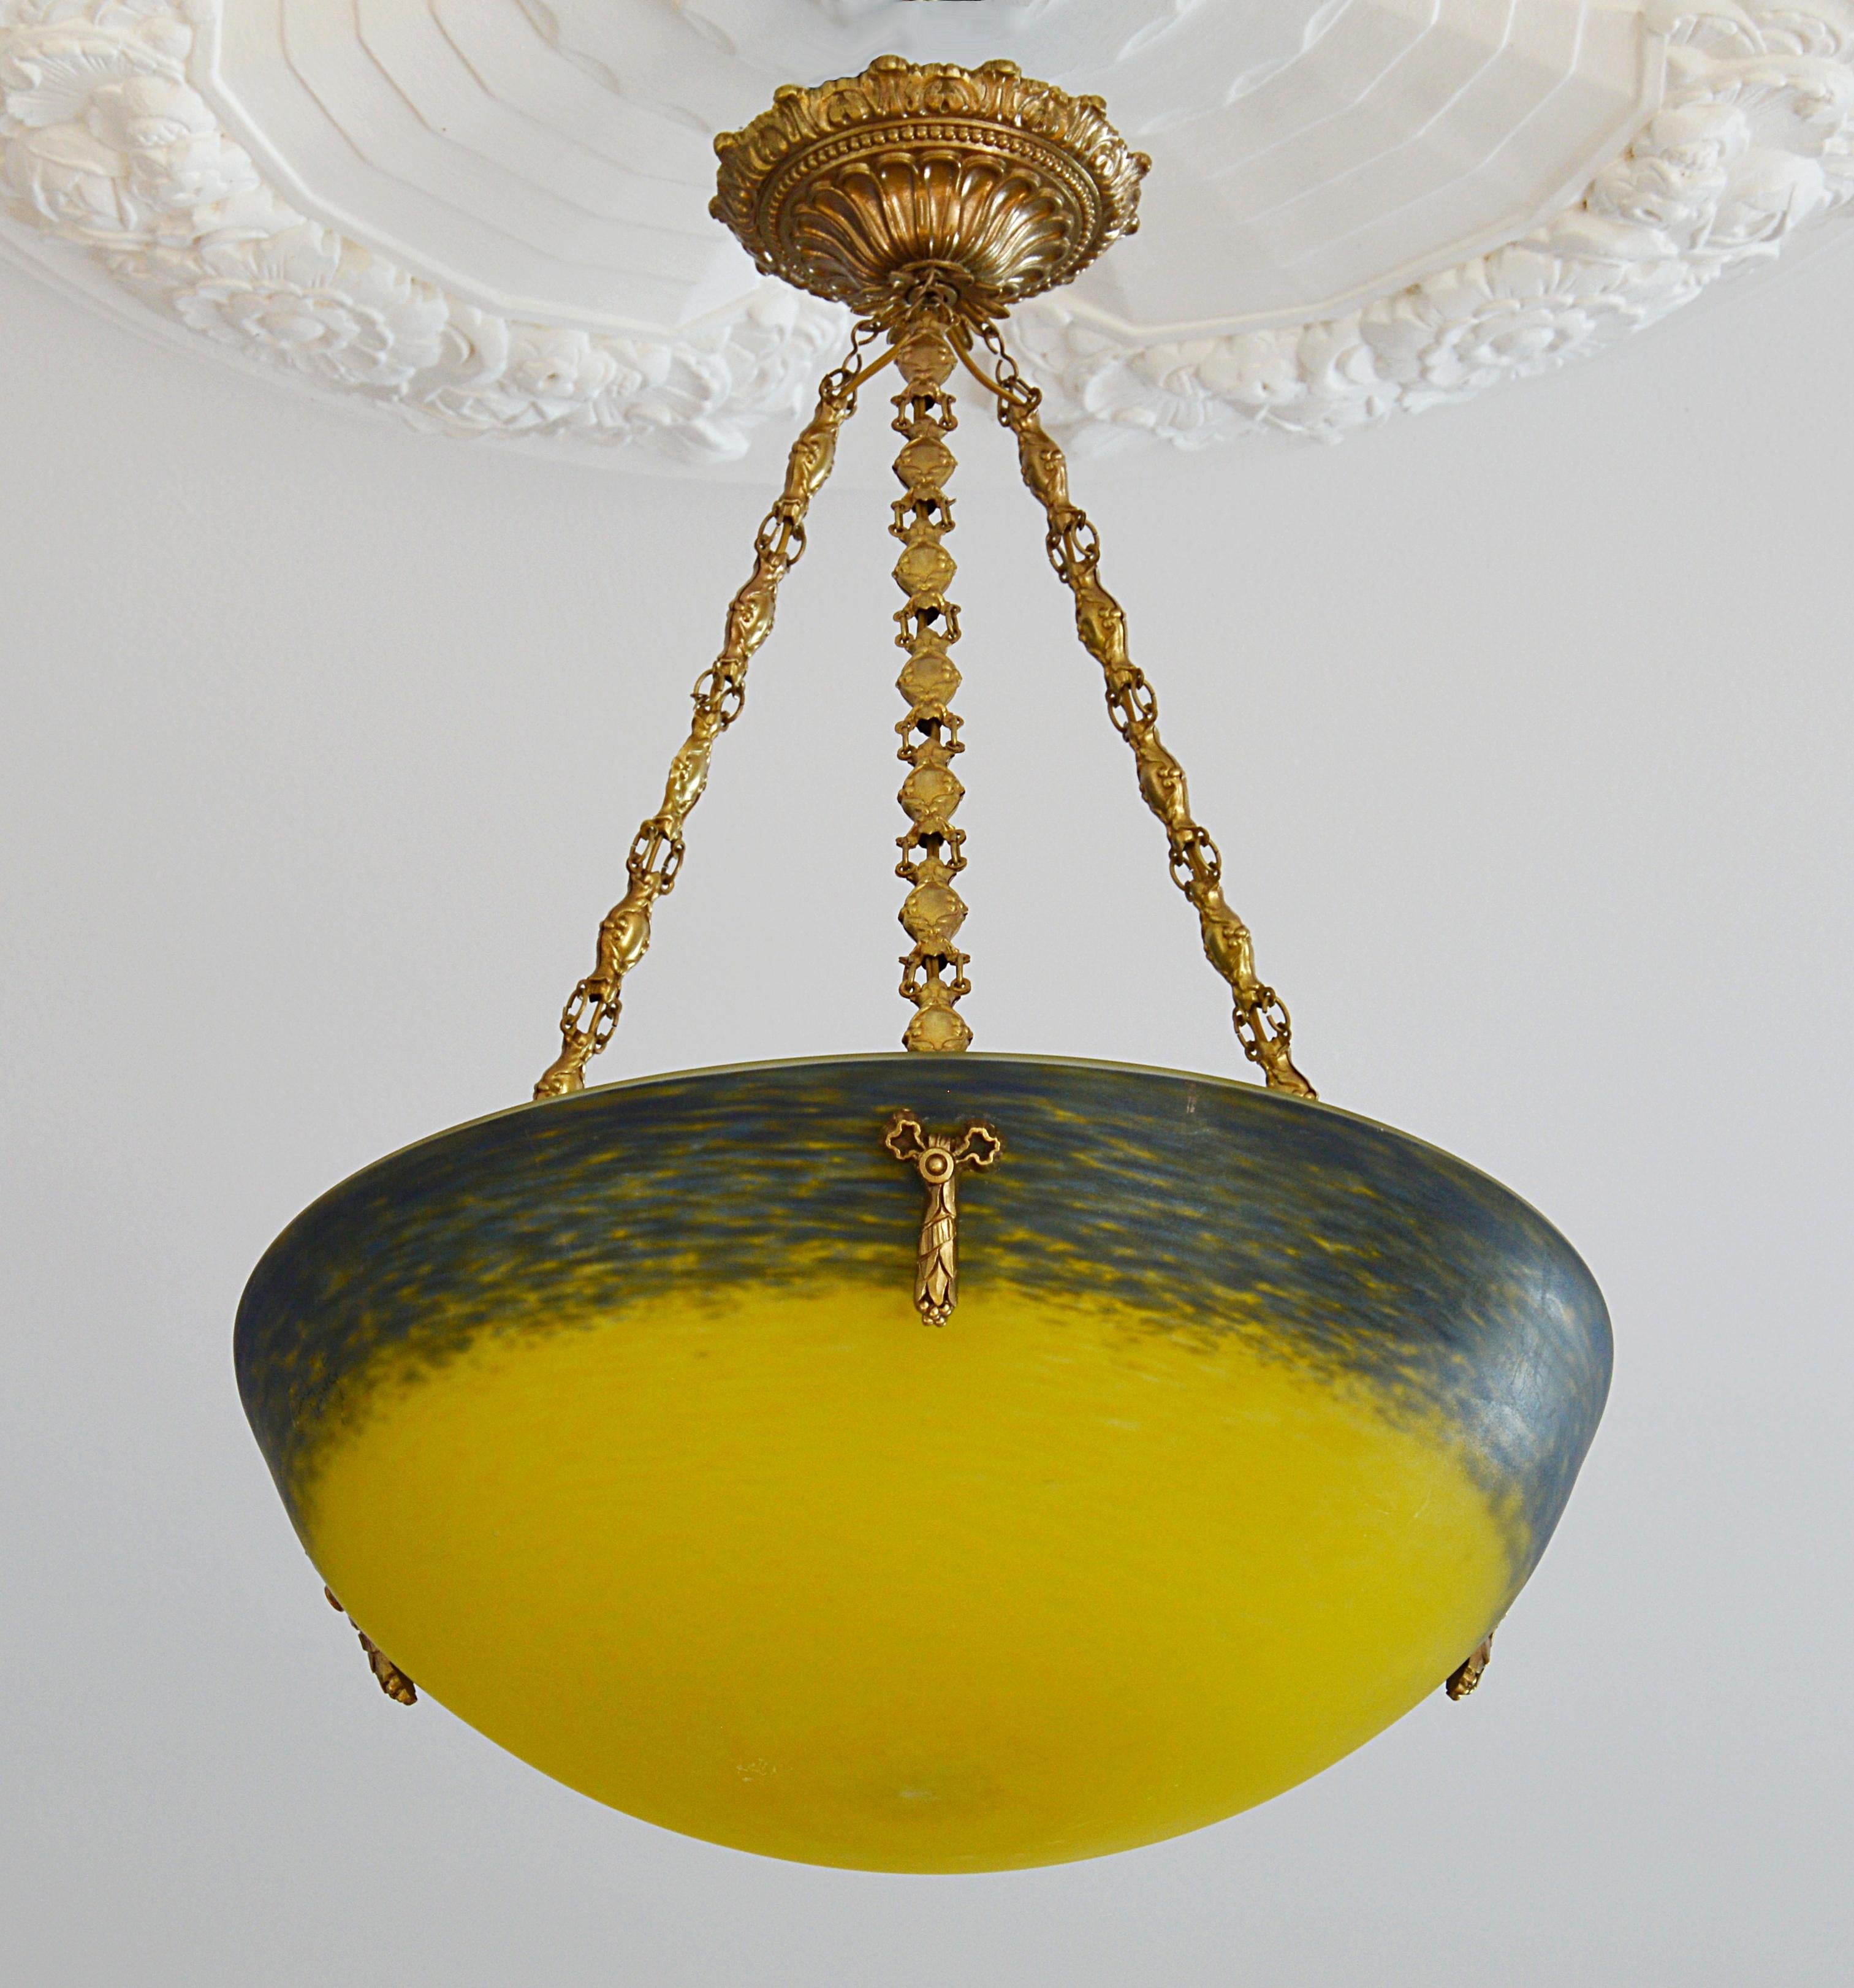 French Art Deco pendant chandelier by Andre Delatte (Jarville, near Nancy), France, late 1920s. Glass, solid bronze and brass. Mottled blown double glass lampshade. Colors: yellow and blue. Superb solid bronze (canopy and hidden-holes) and stamped